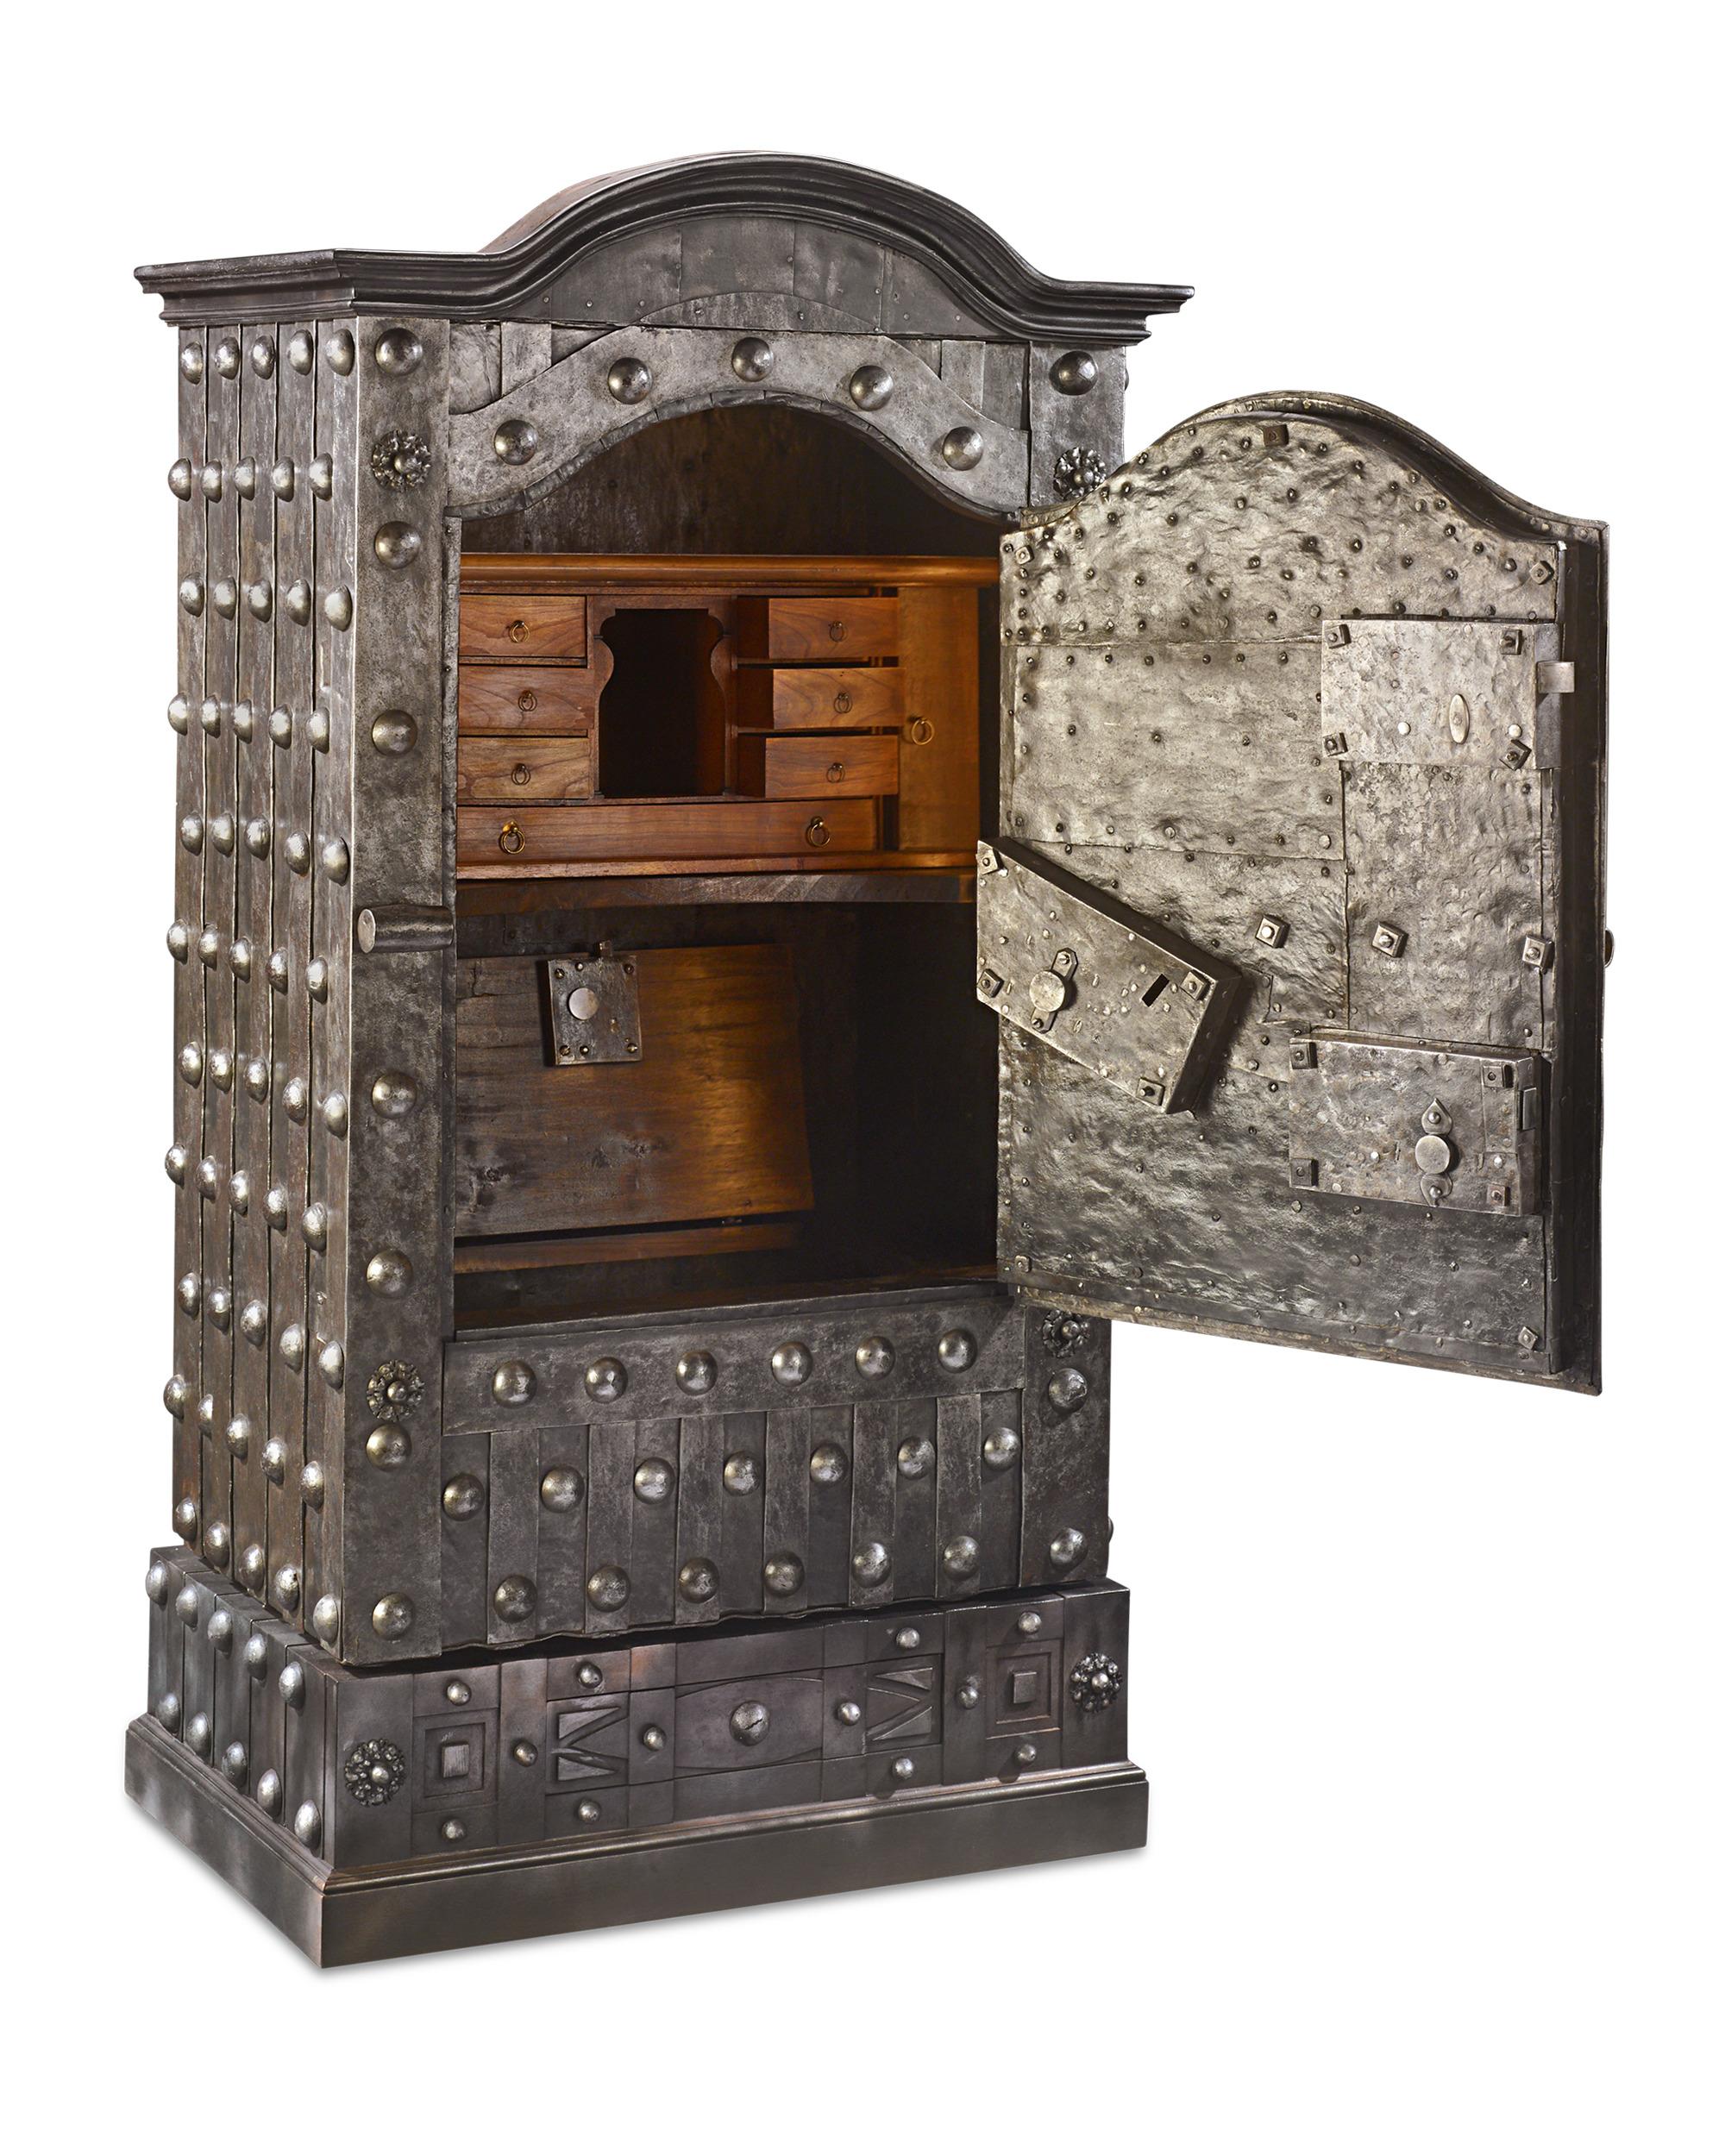 Visually imposing and mechanically complex, this formidable Italian Baroque safe would have provided unparalleled security for storing valuables in the 18th century. The hobnail motifs covering the safe are a testament to the fine artistry and